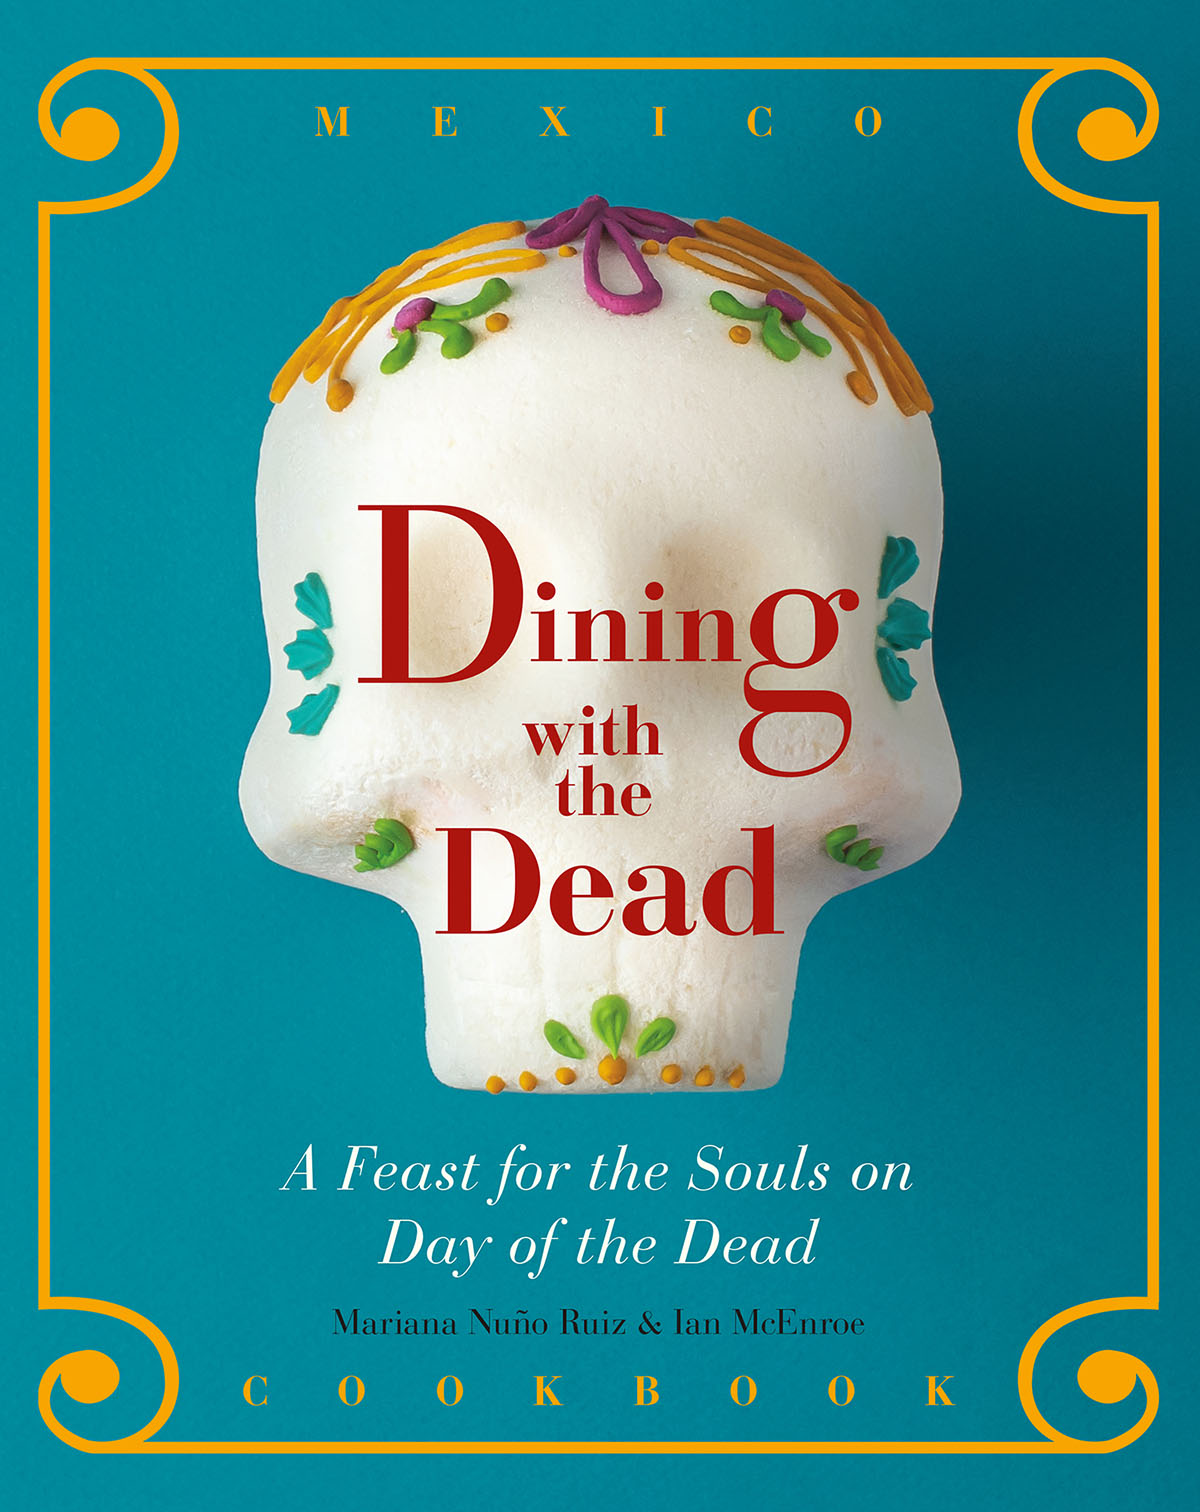 The cover of a teal book with gold border and a sugar skull with red type reading "Dining with the Dead"